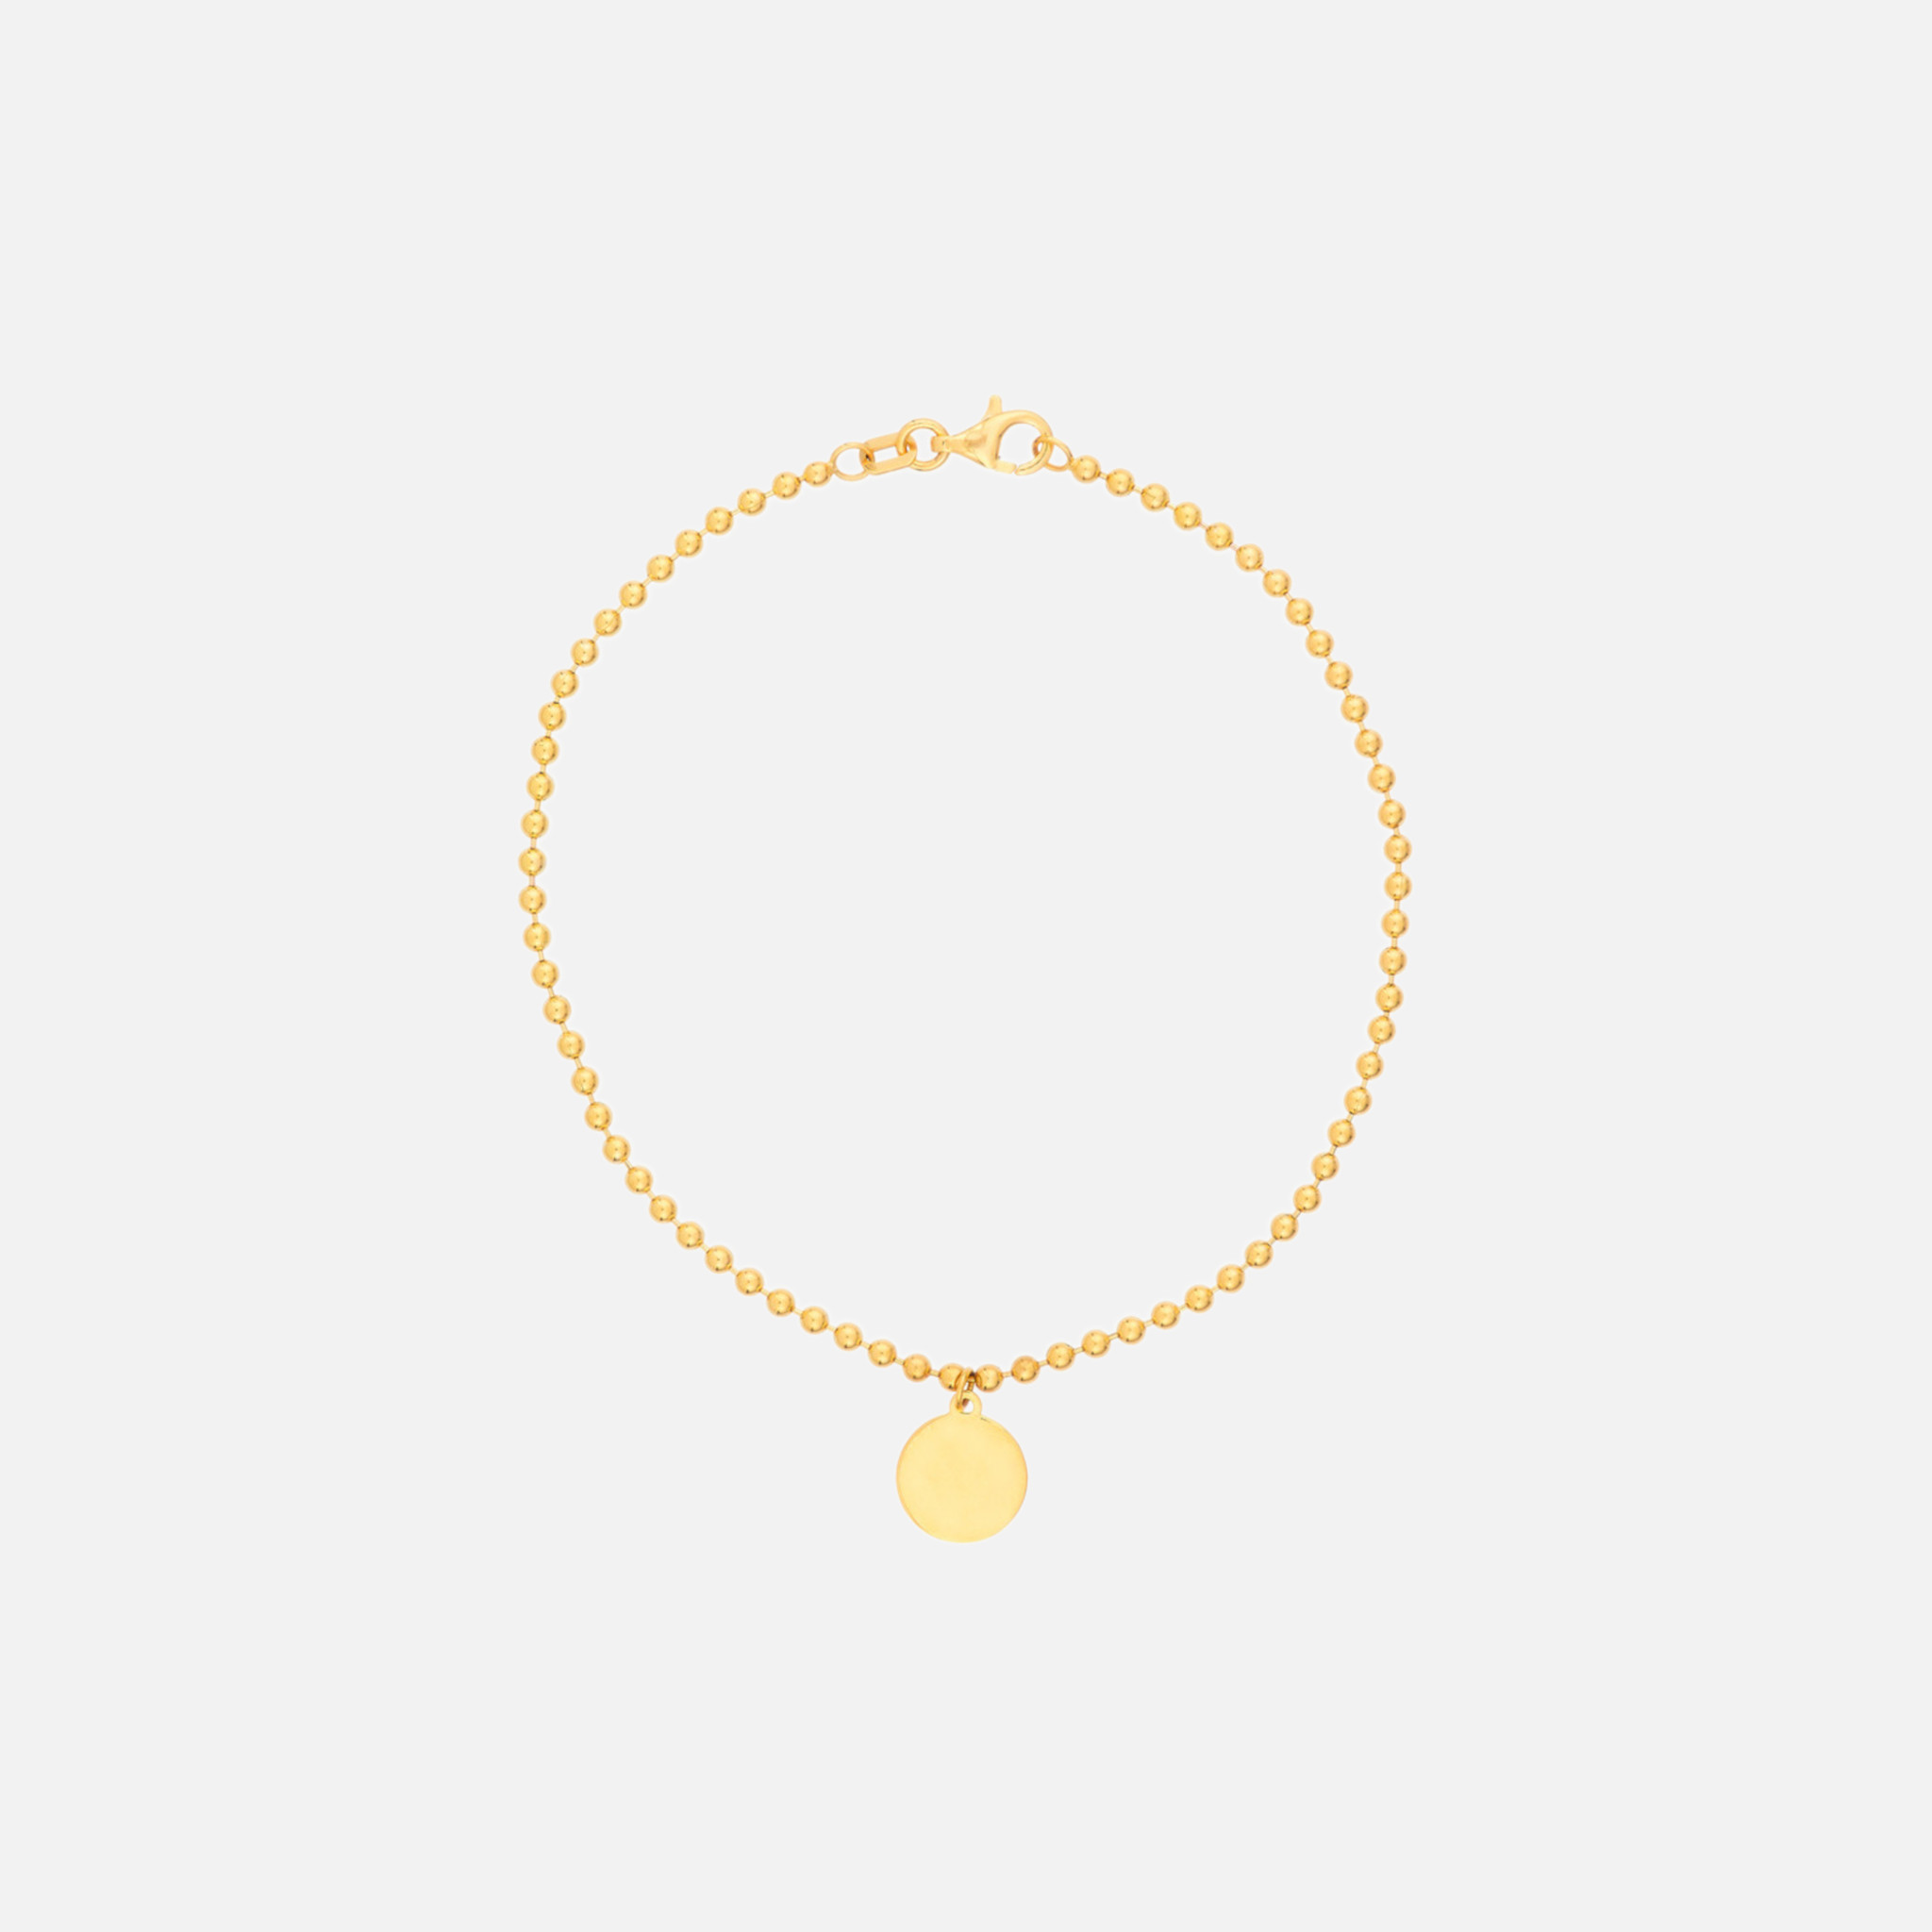 Handcrafted shiny 14k gold ball chain bracelet with an engravable coin charm.